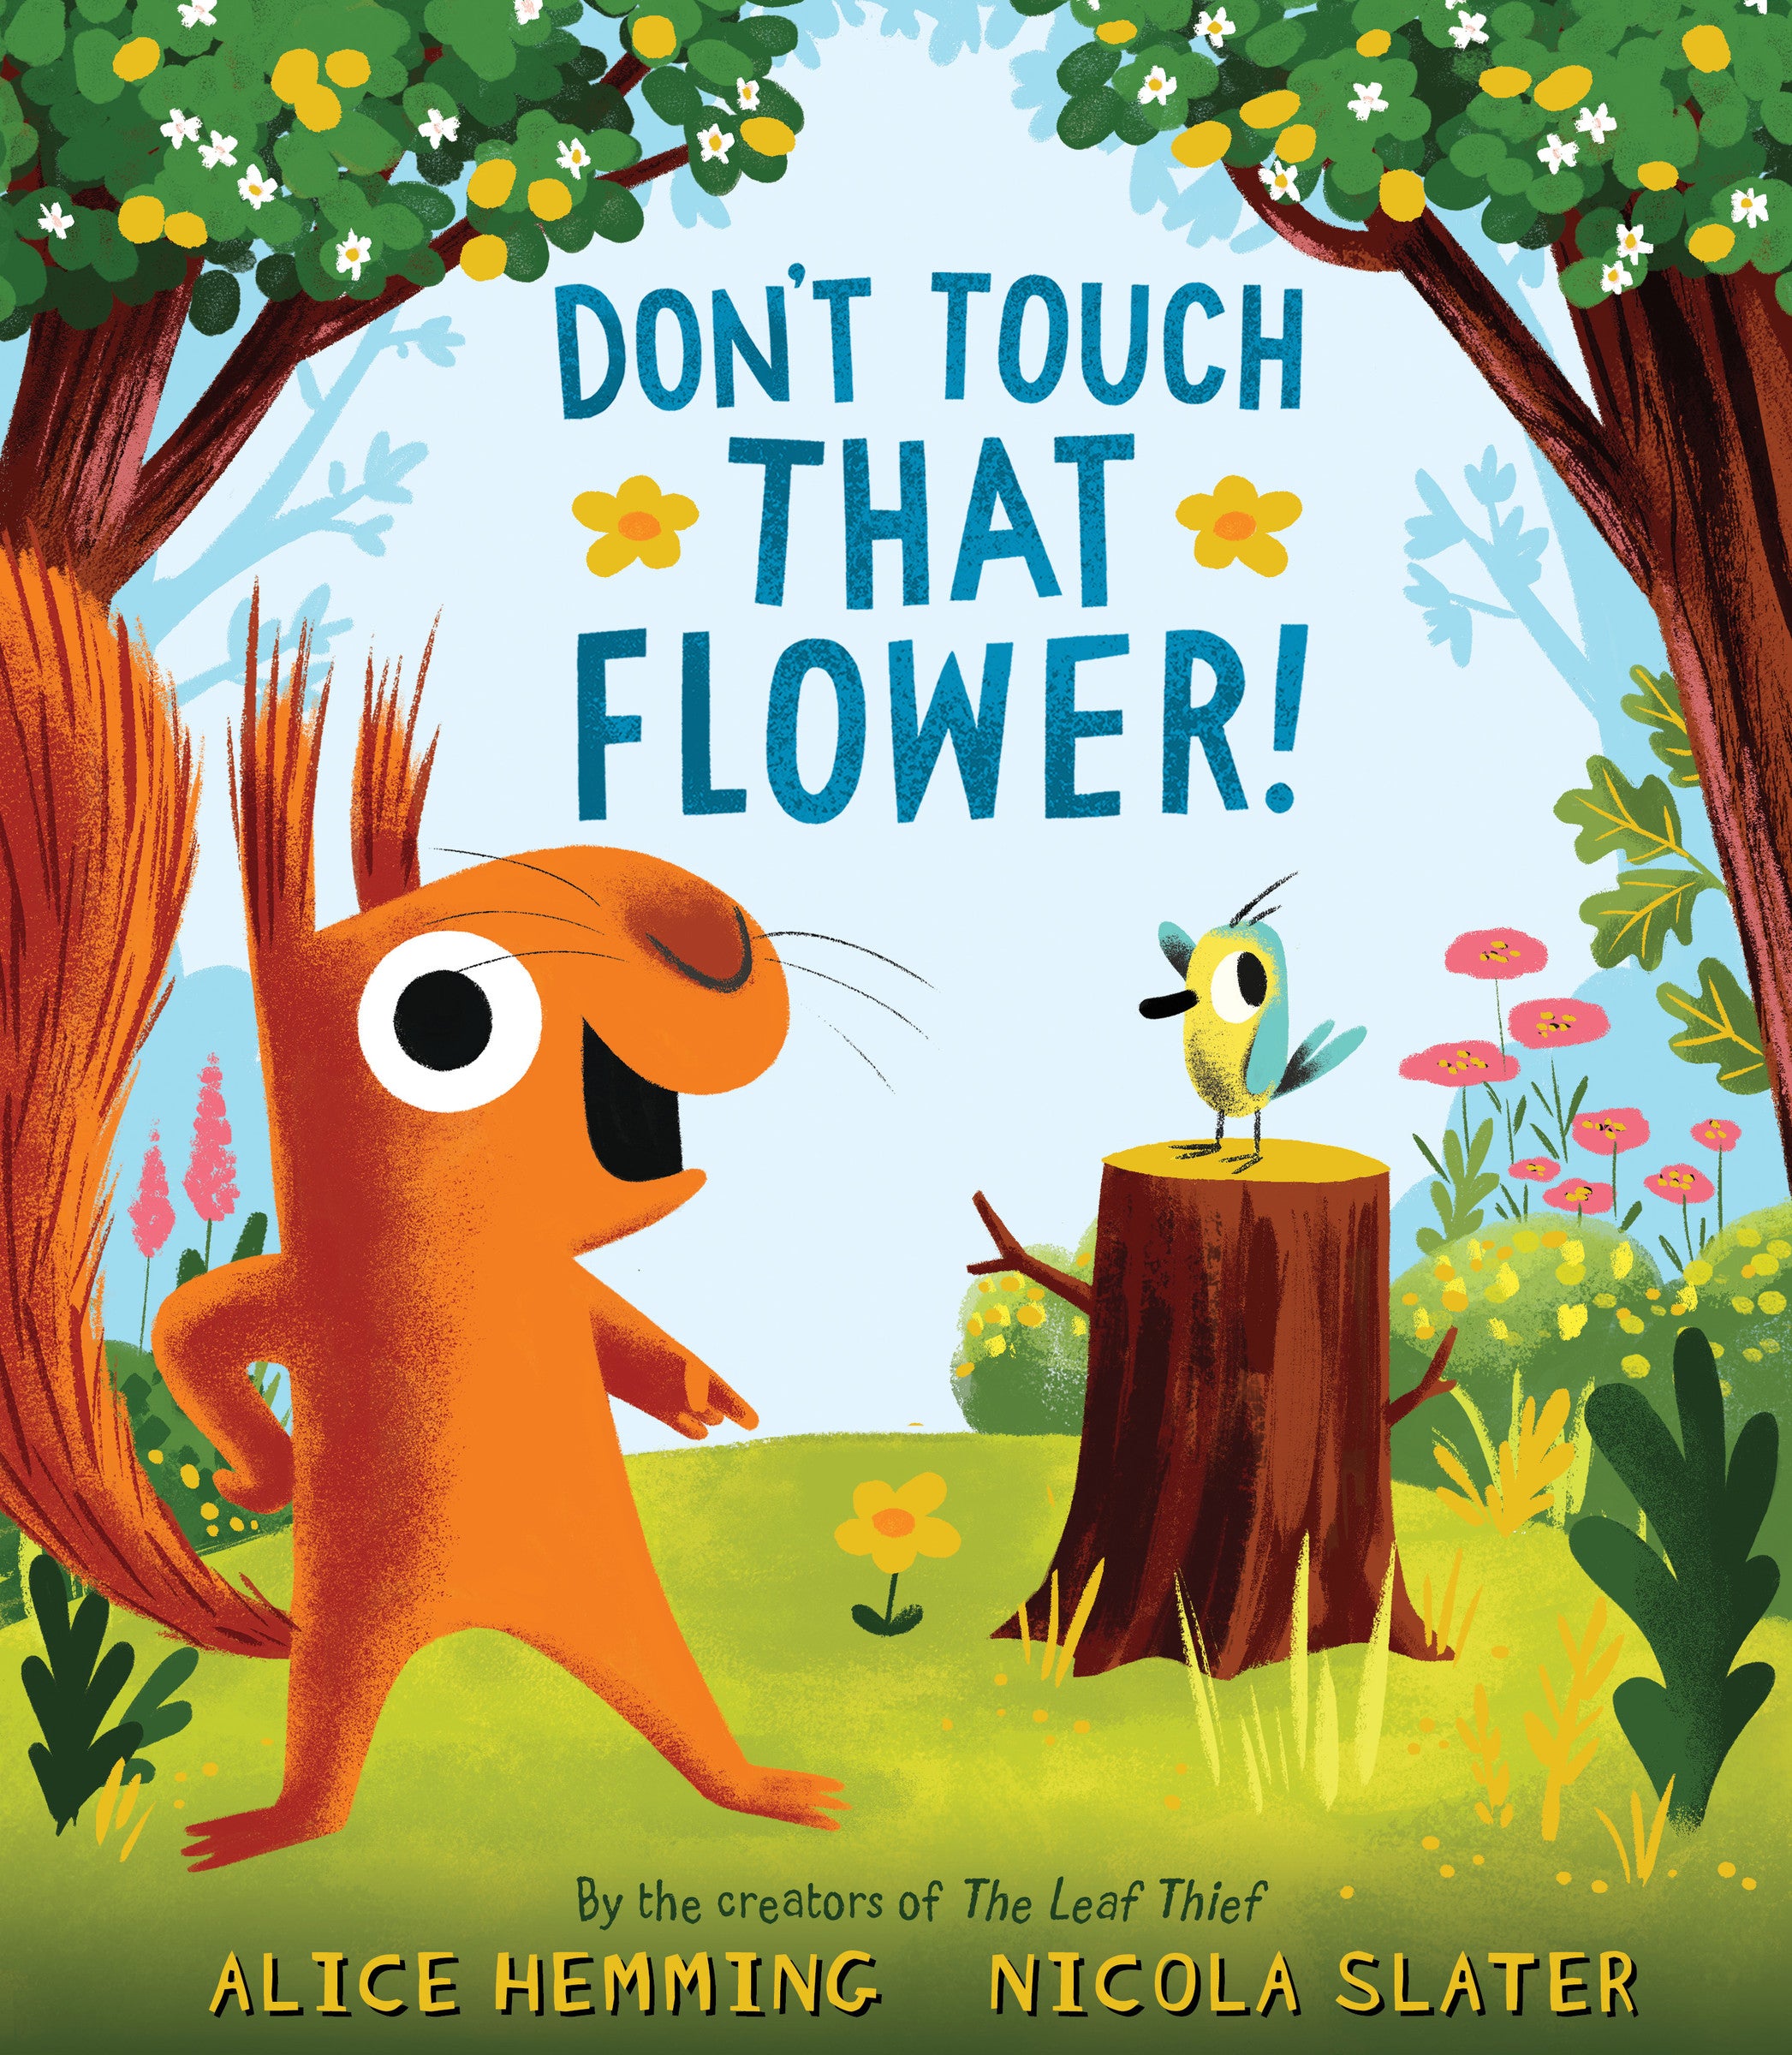 Don't Touch that Flower!